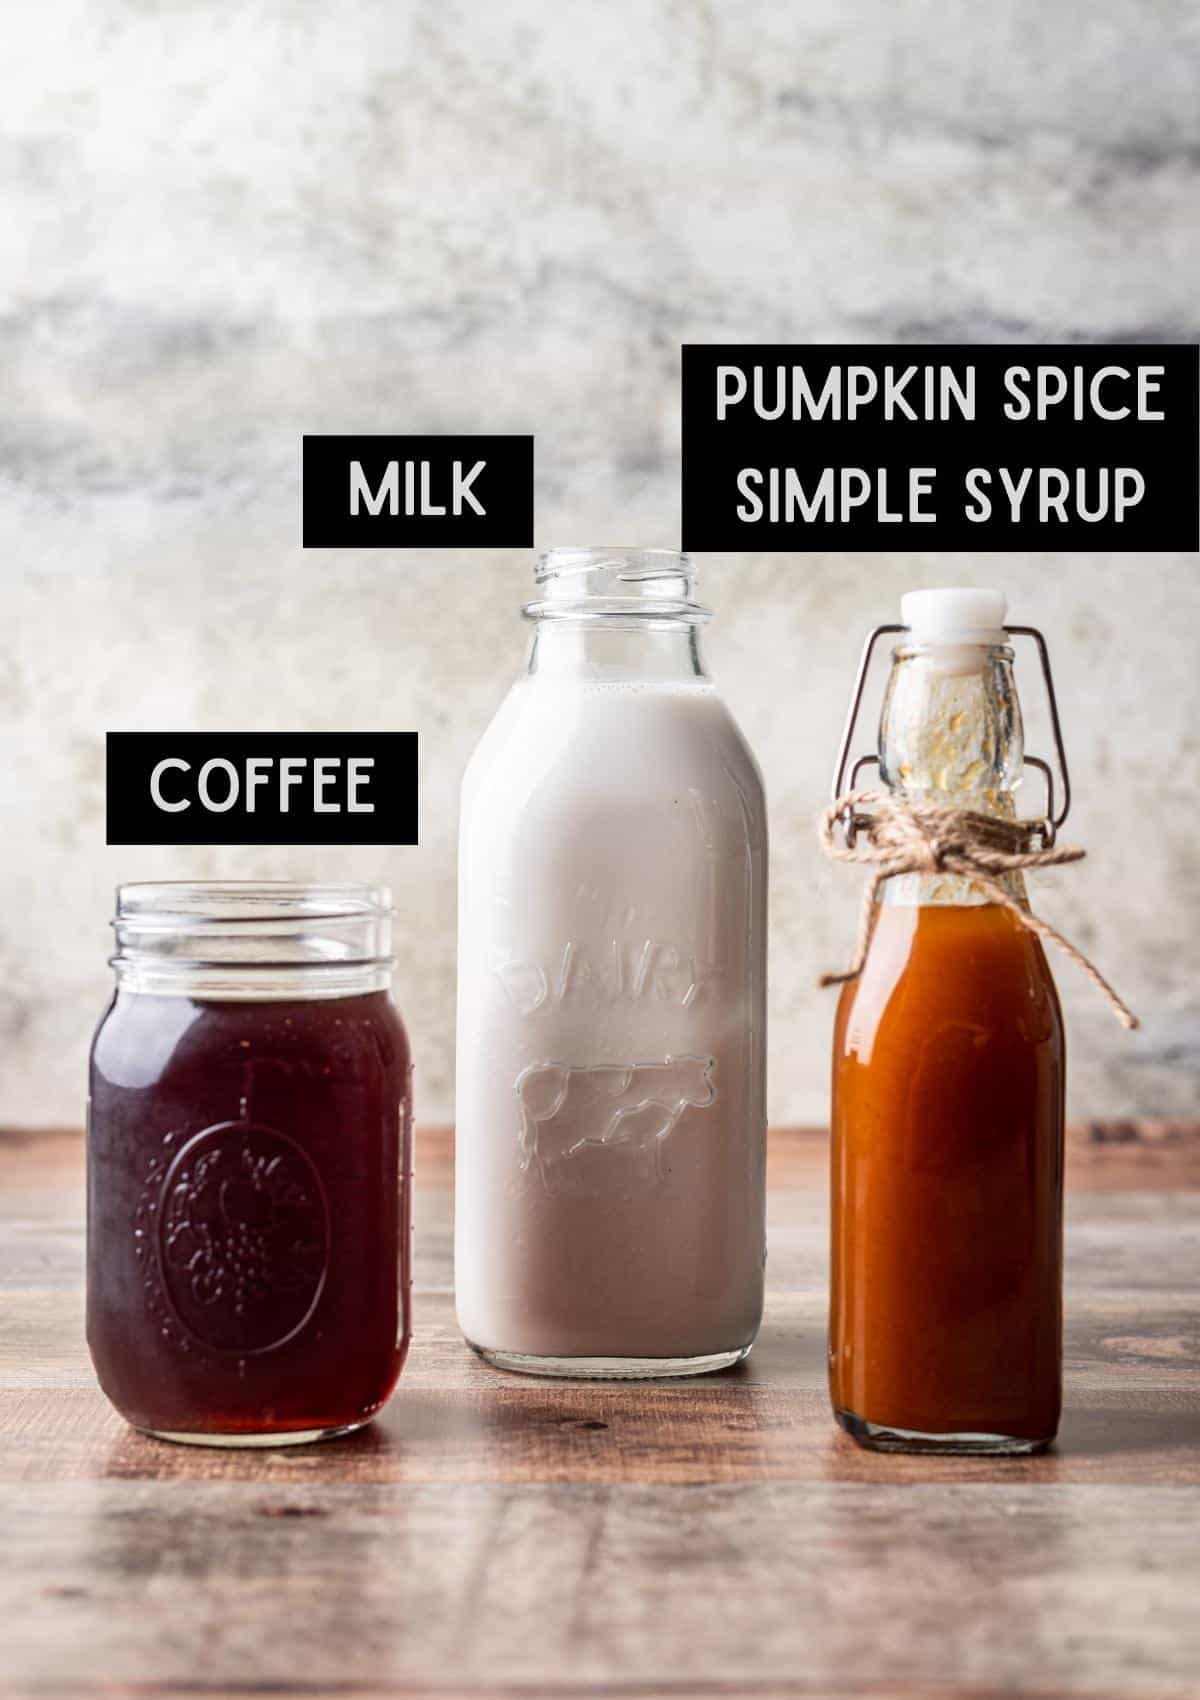 Labelled ingredients for ice pumpkin spice latte (see recipe for details).